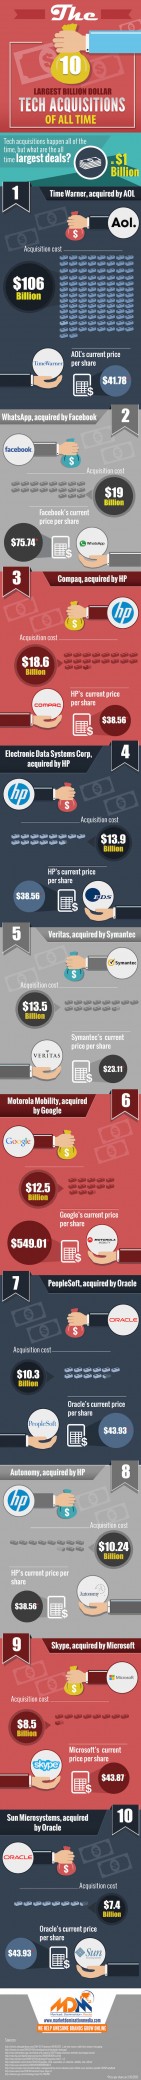 10 biggest Billion dollar Tech Acquisitions of All Time (Infographic)